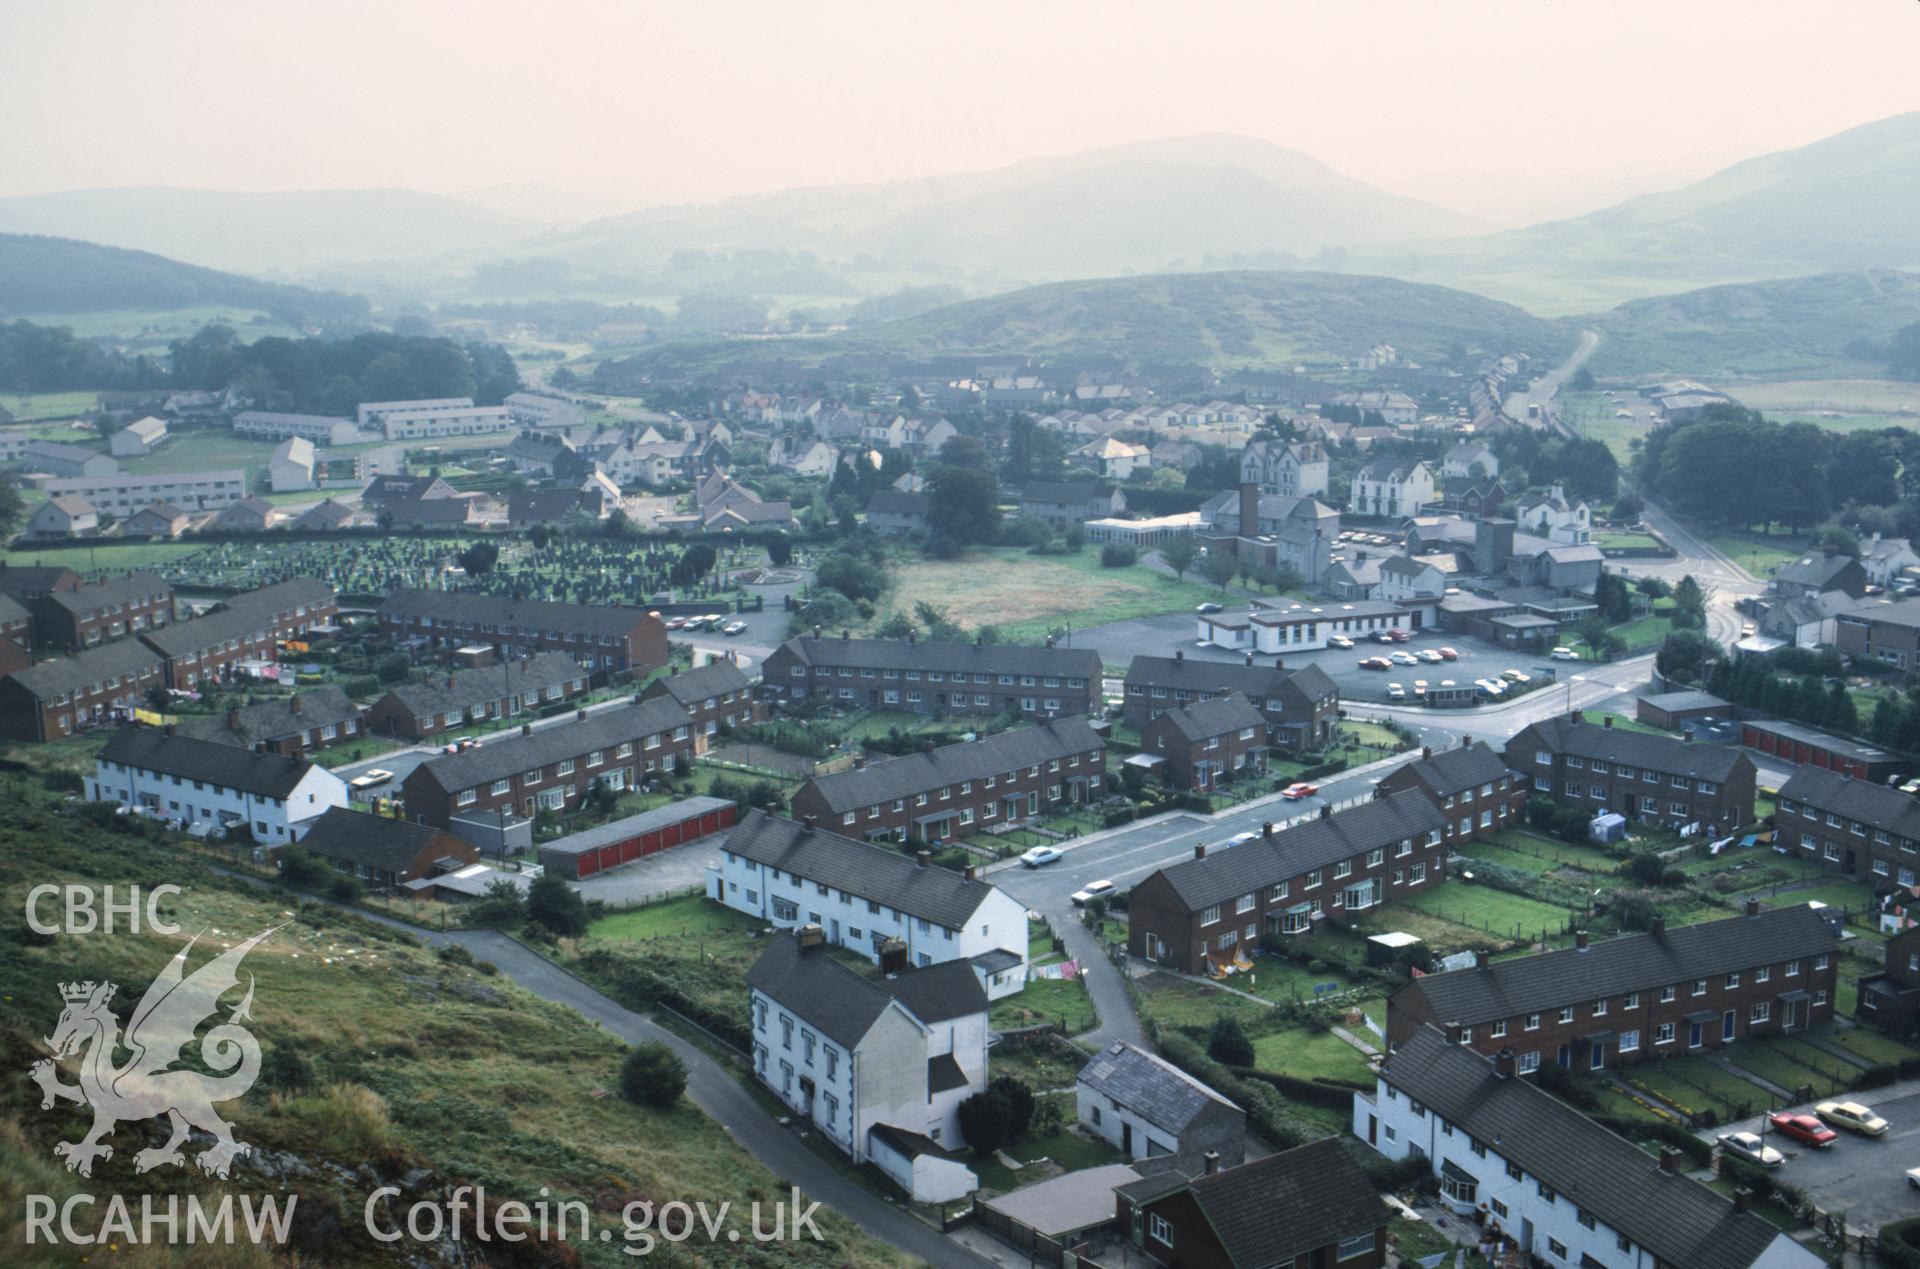 Colour photographic transparency showing aerial oblique view over Machynlleth town and council housing; collated by the former Central Office of Information.